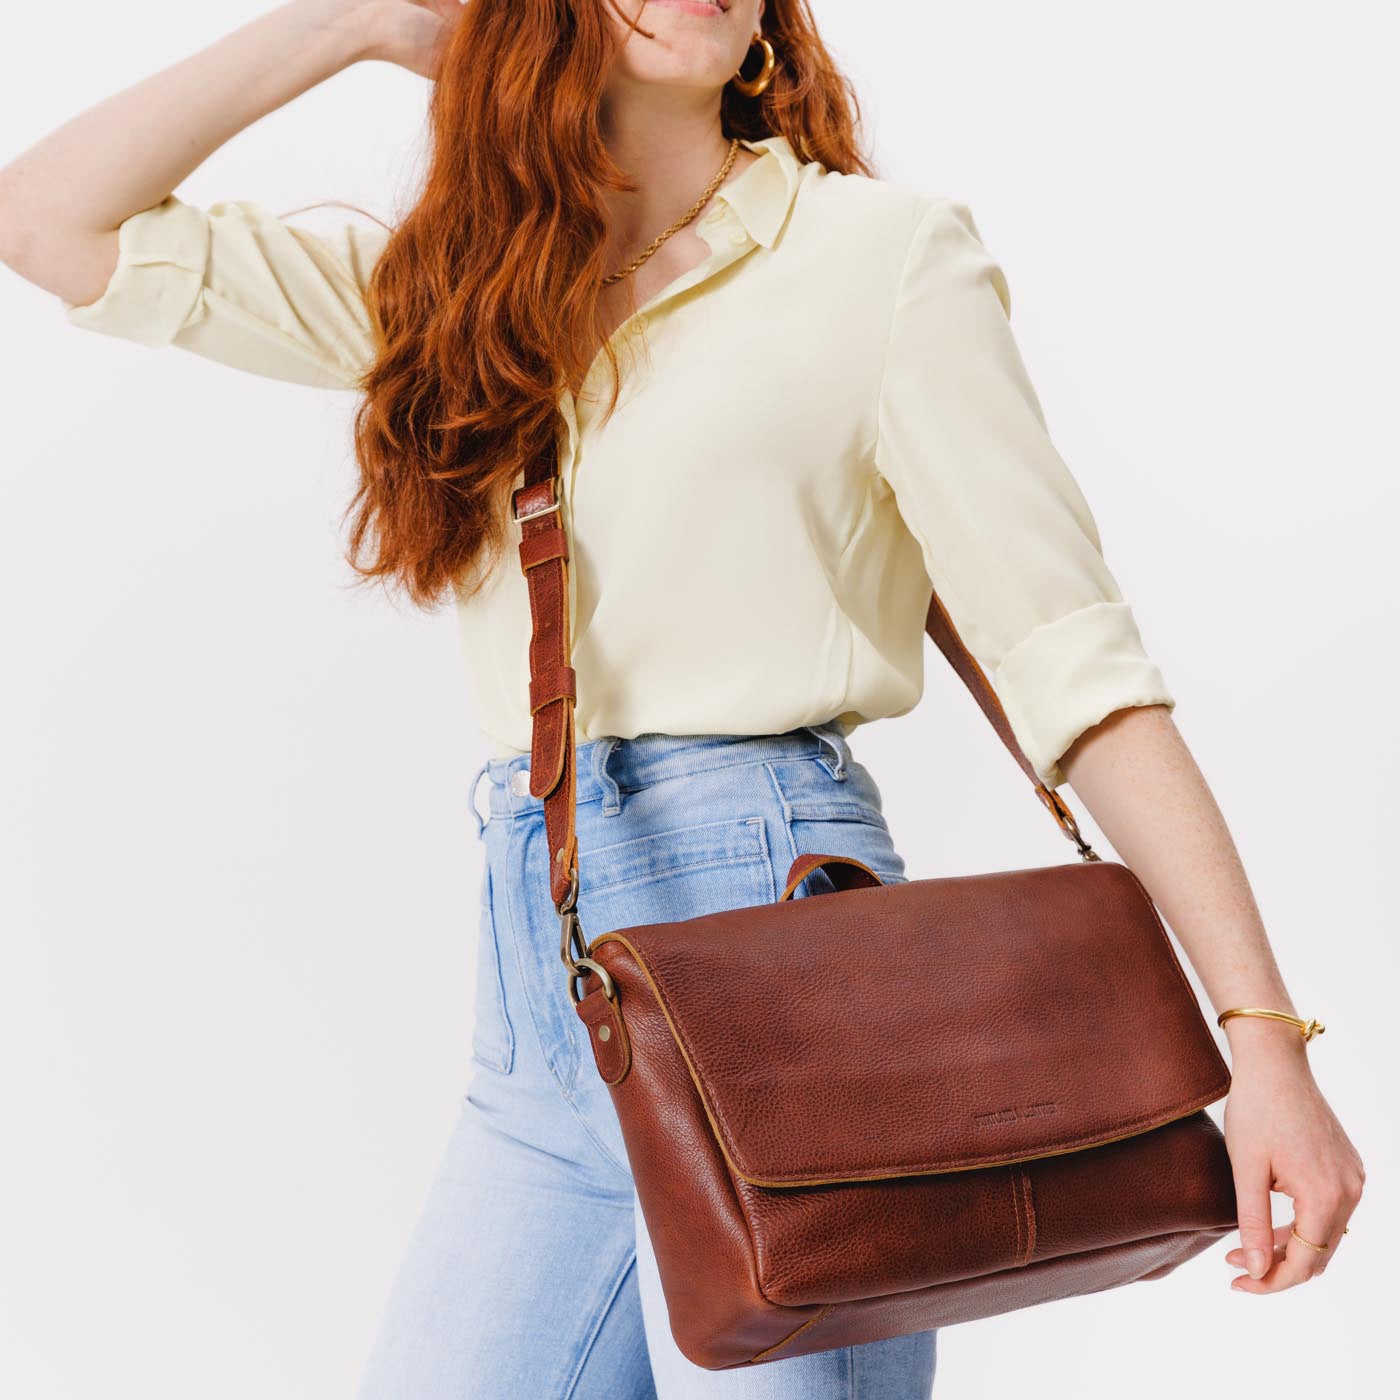 The Compton Top Grain Leather Messenger / Laptop Bag – Cotswold Hipster